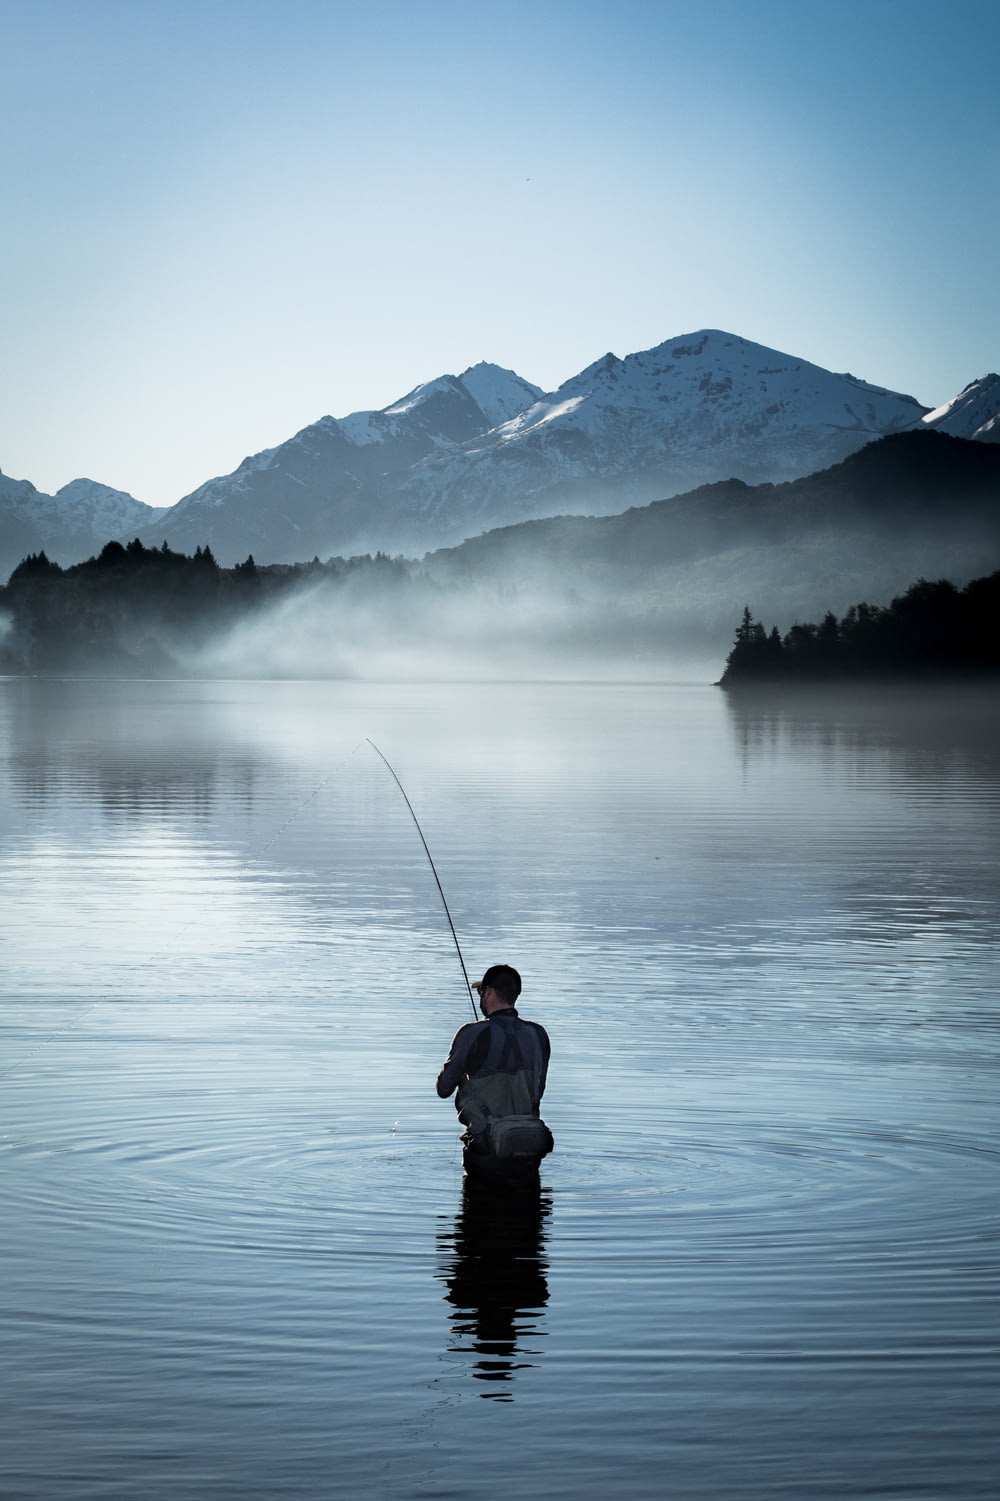 a man standing in a body of water holding a fishing pole